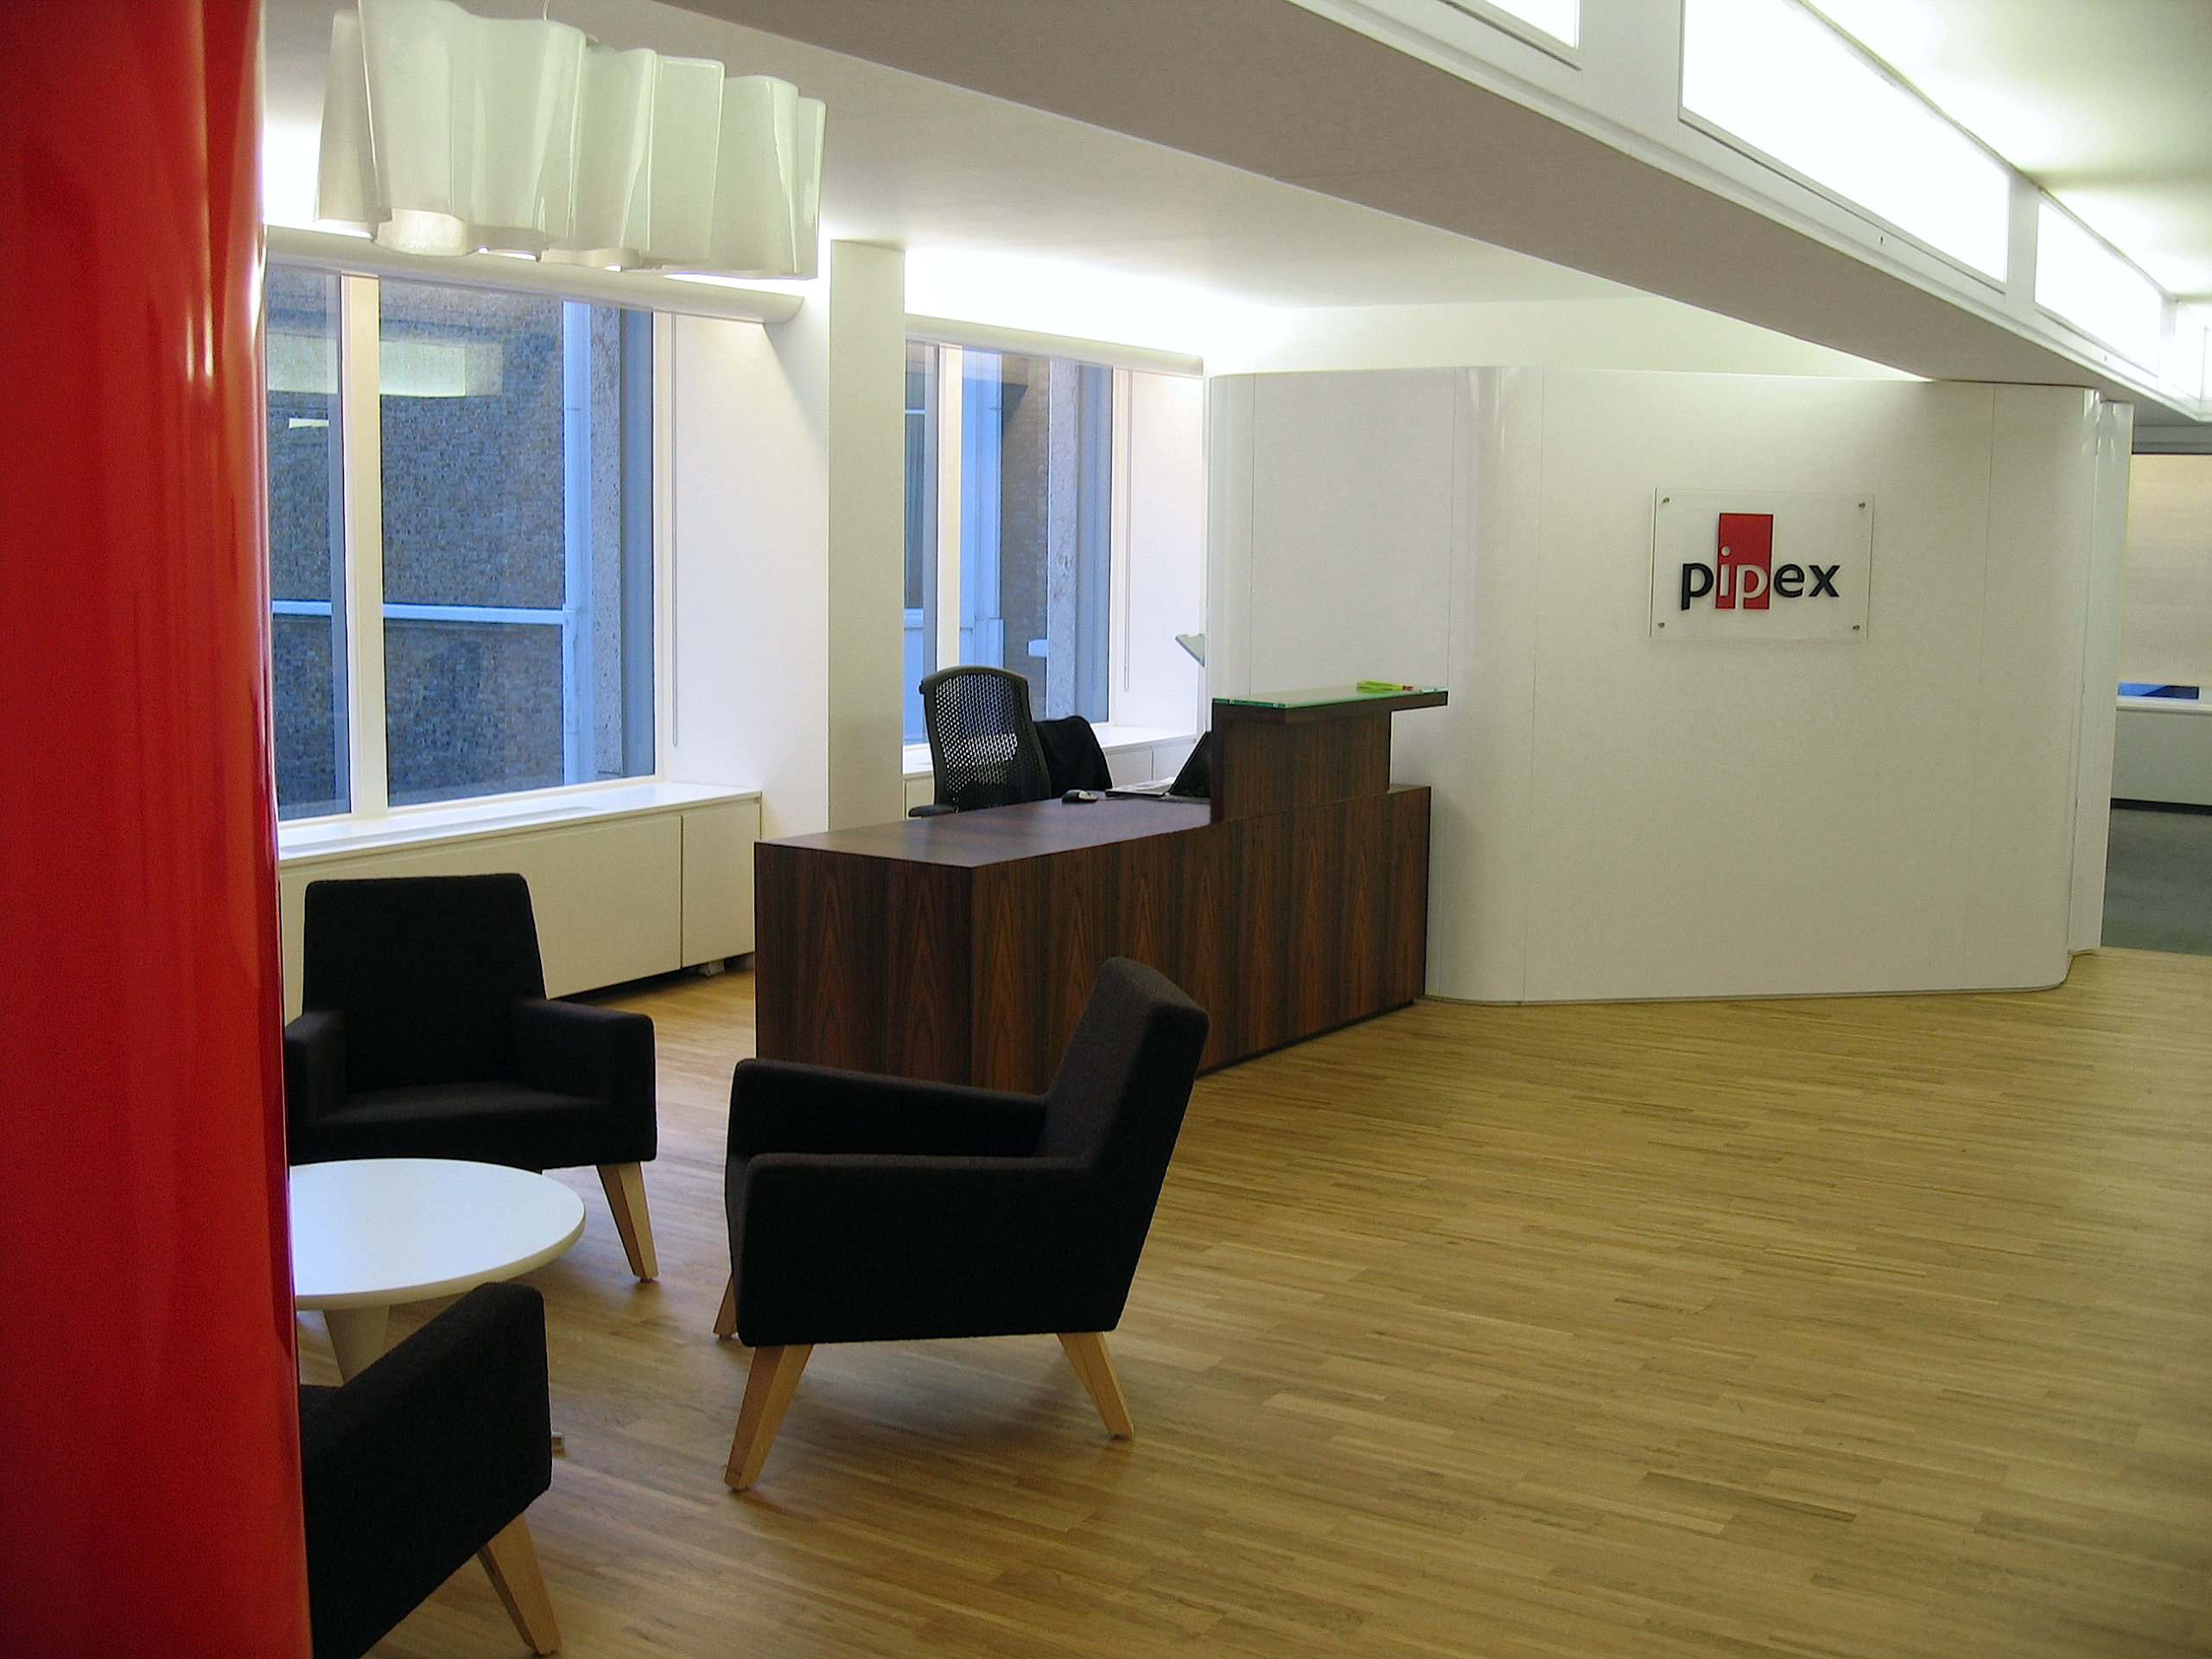 Offices for Pipex, Economist Building, London